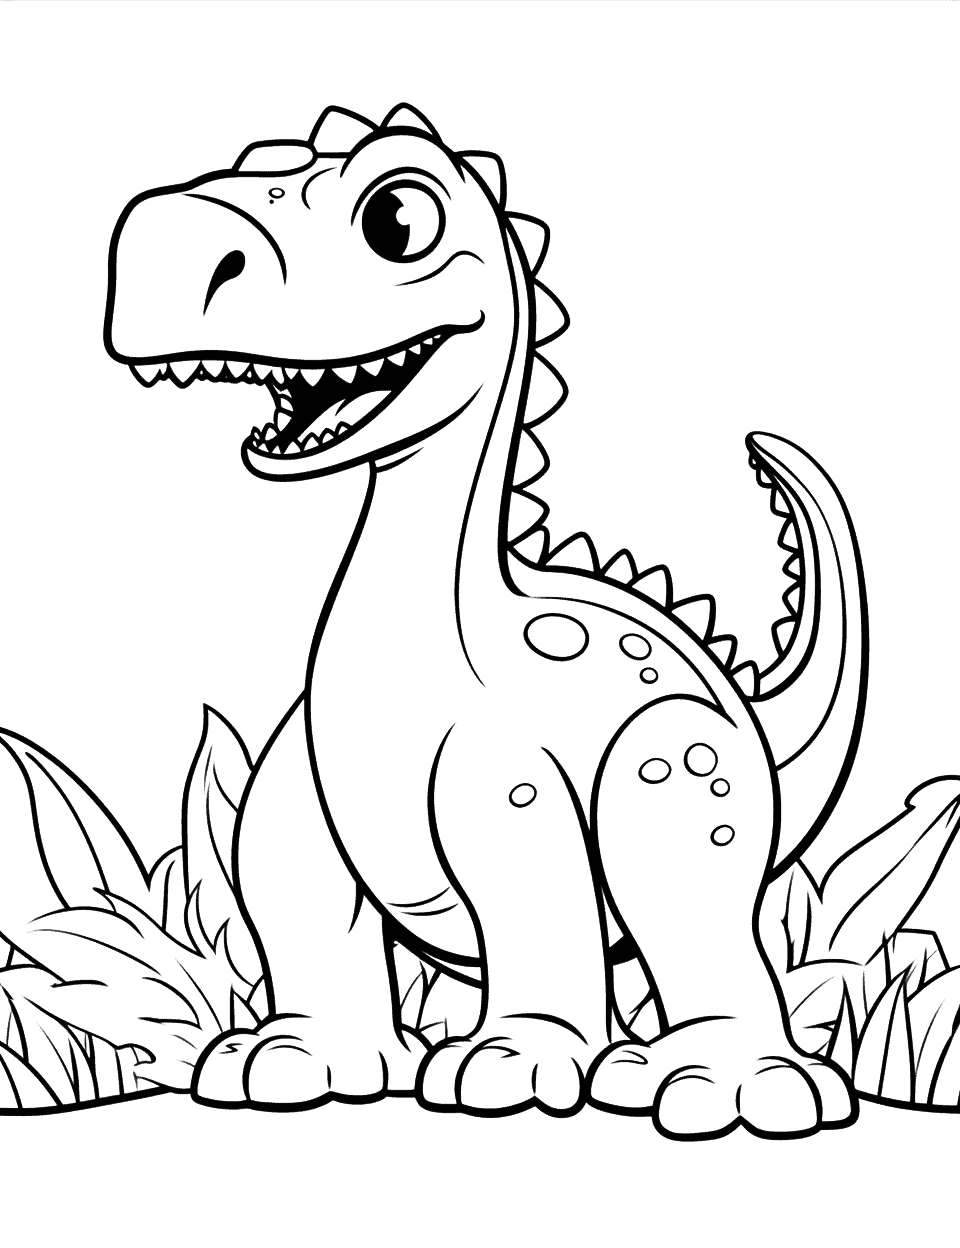 Simple Dinosaur Outline Coloring Page - Simple, easy-to-color outline of a dinosaur.